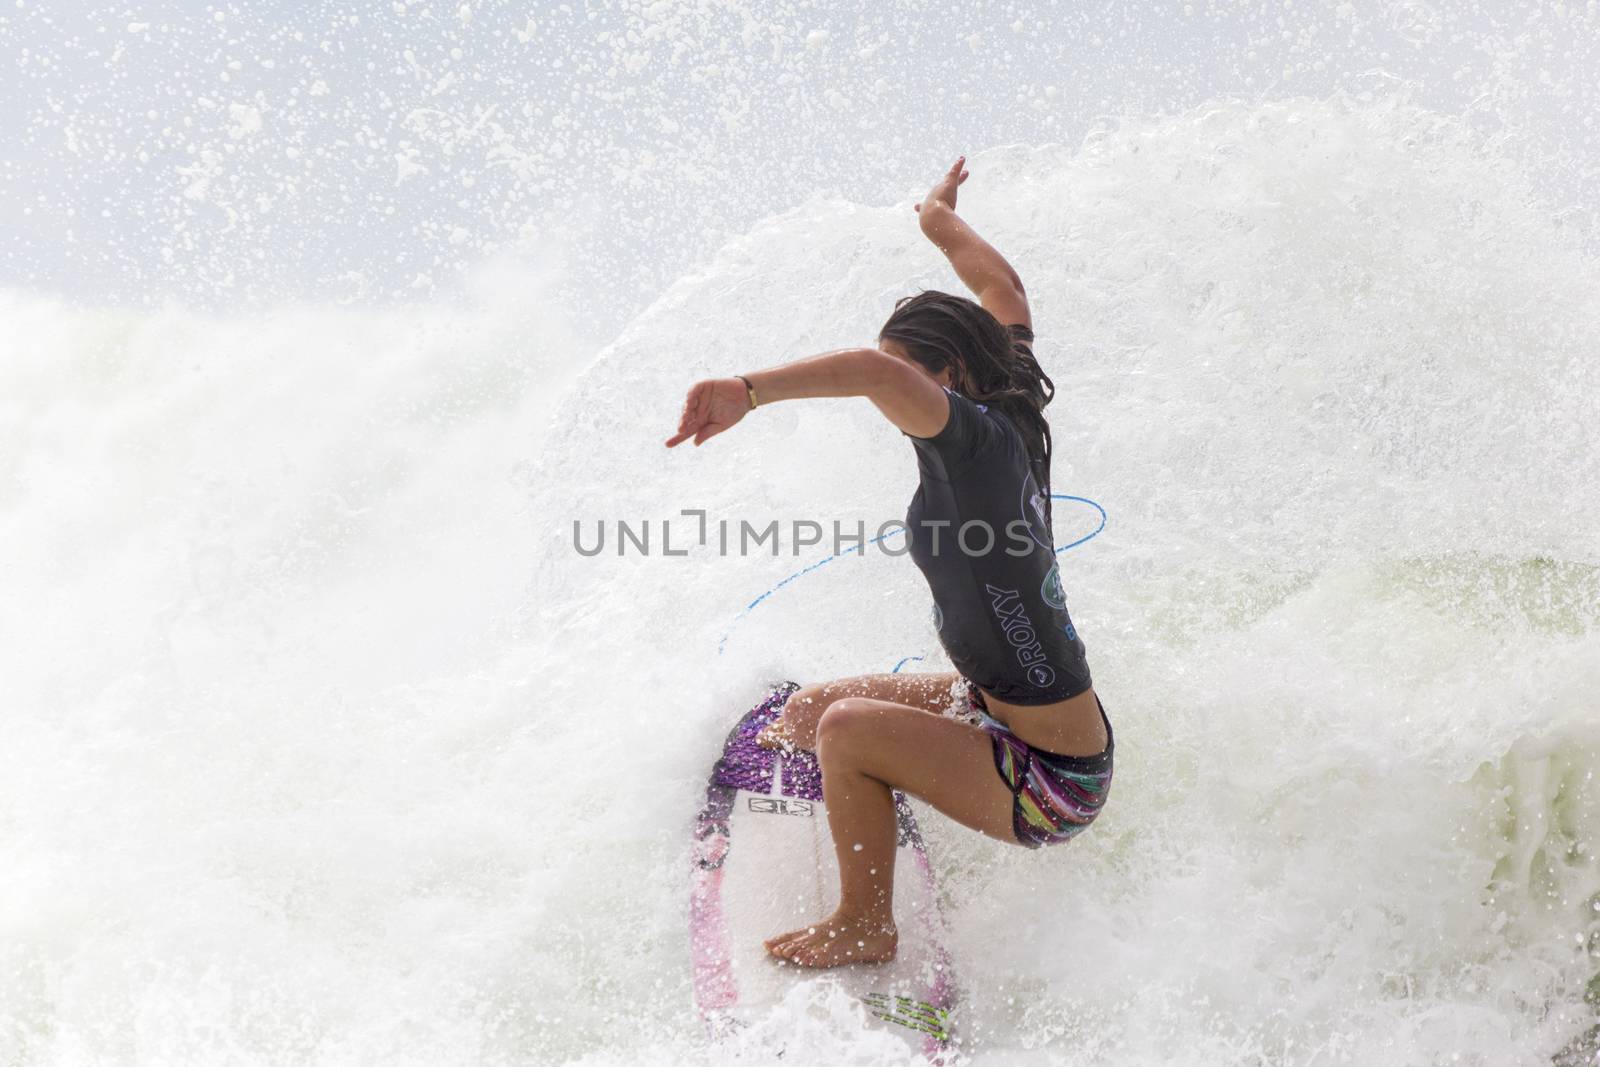 Surfer At A Competition by Imagecom